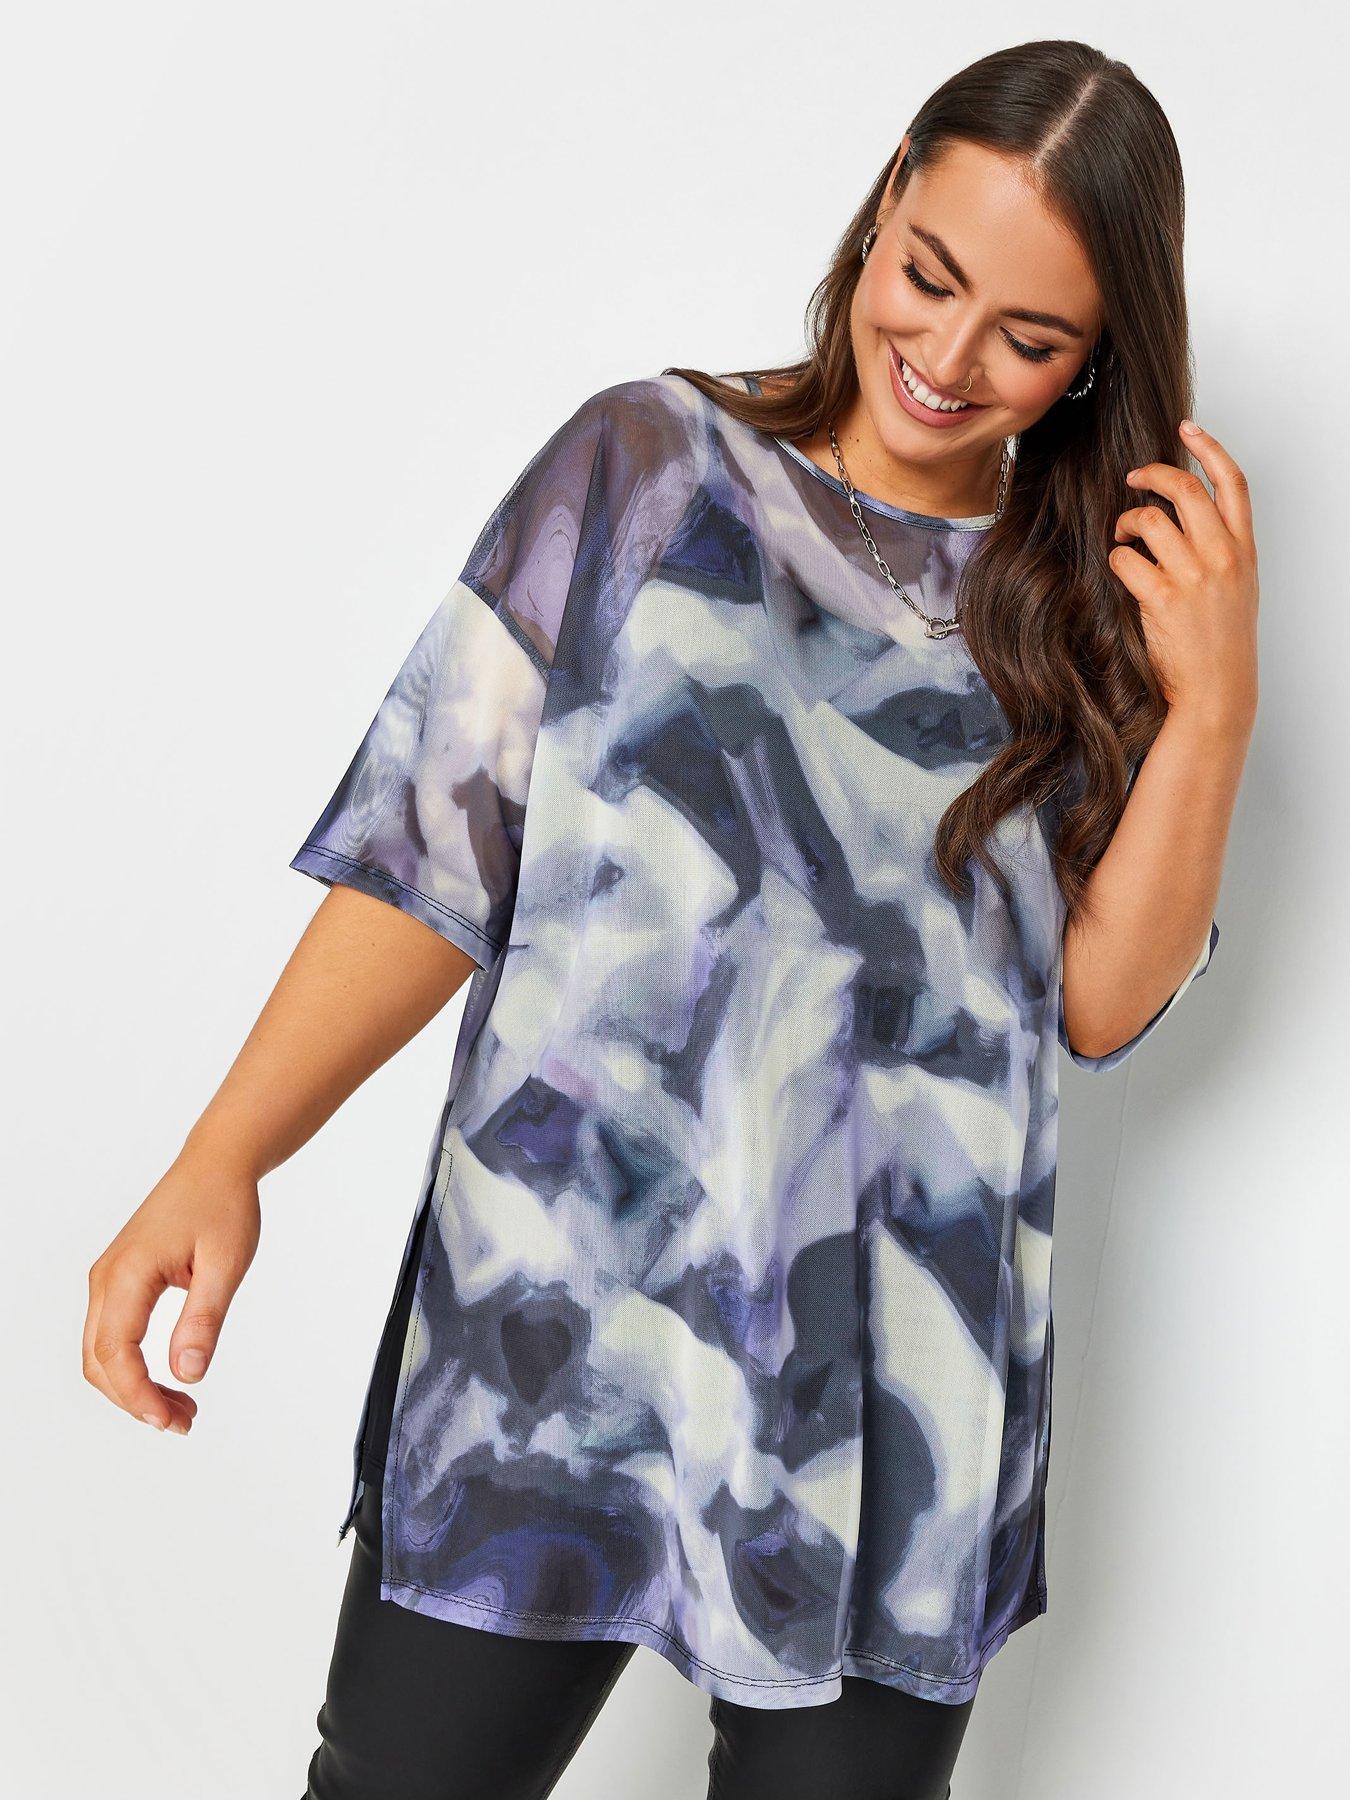 Plus Size Tops  Plus Size Evening Tops for Women - Littlewoods